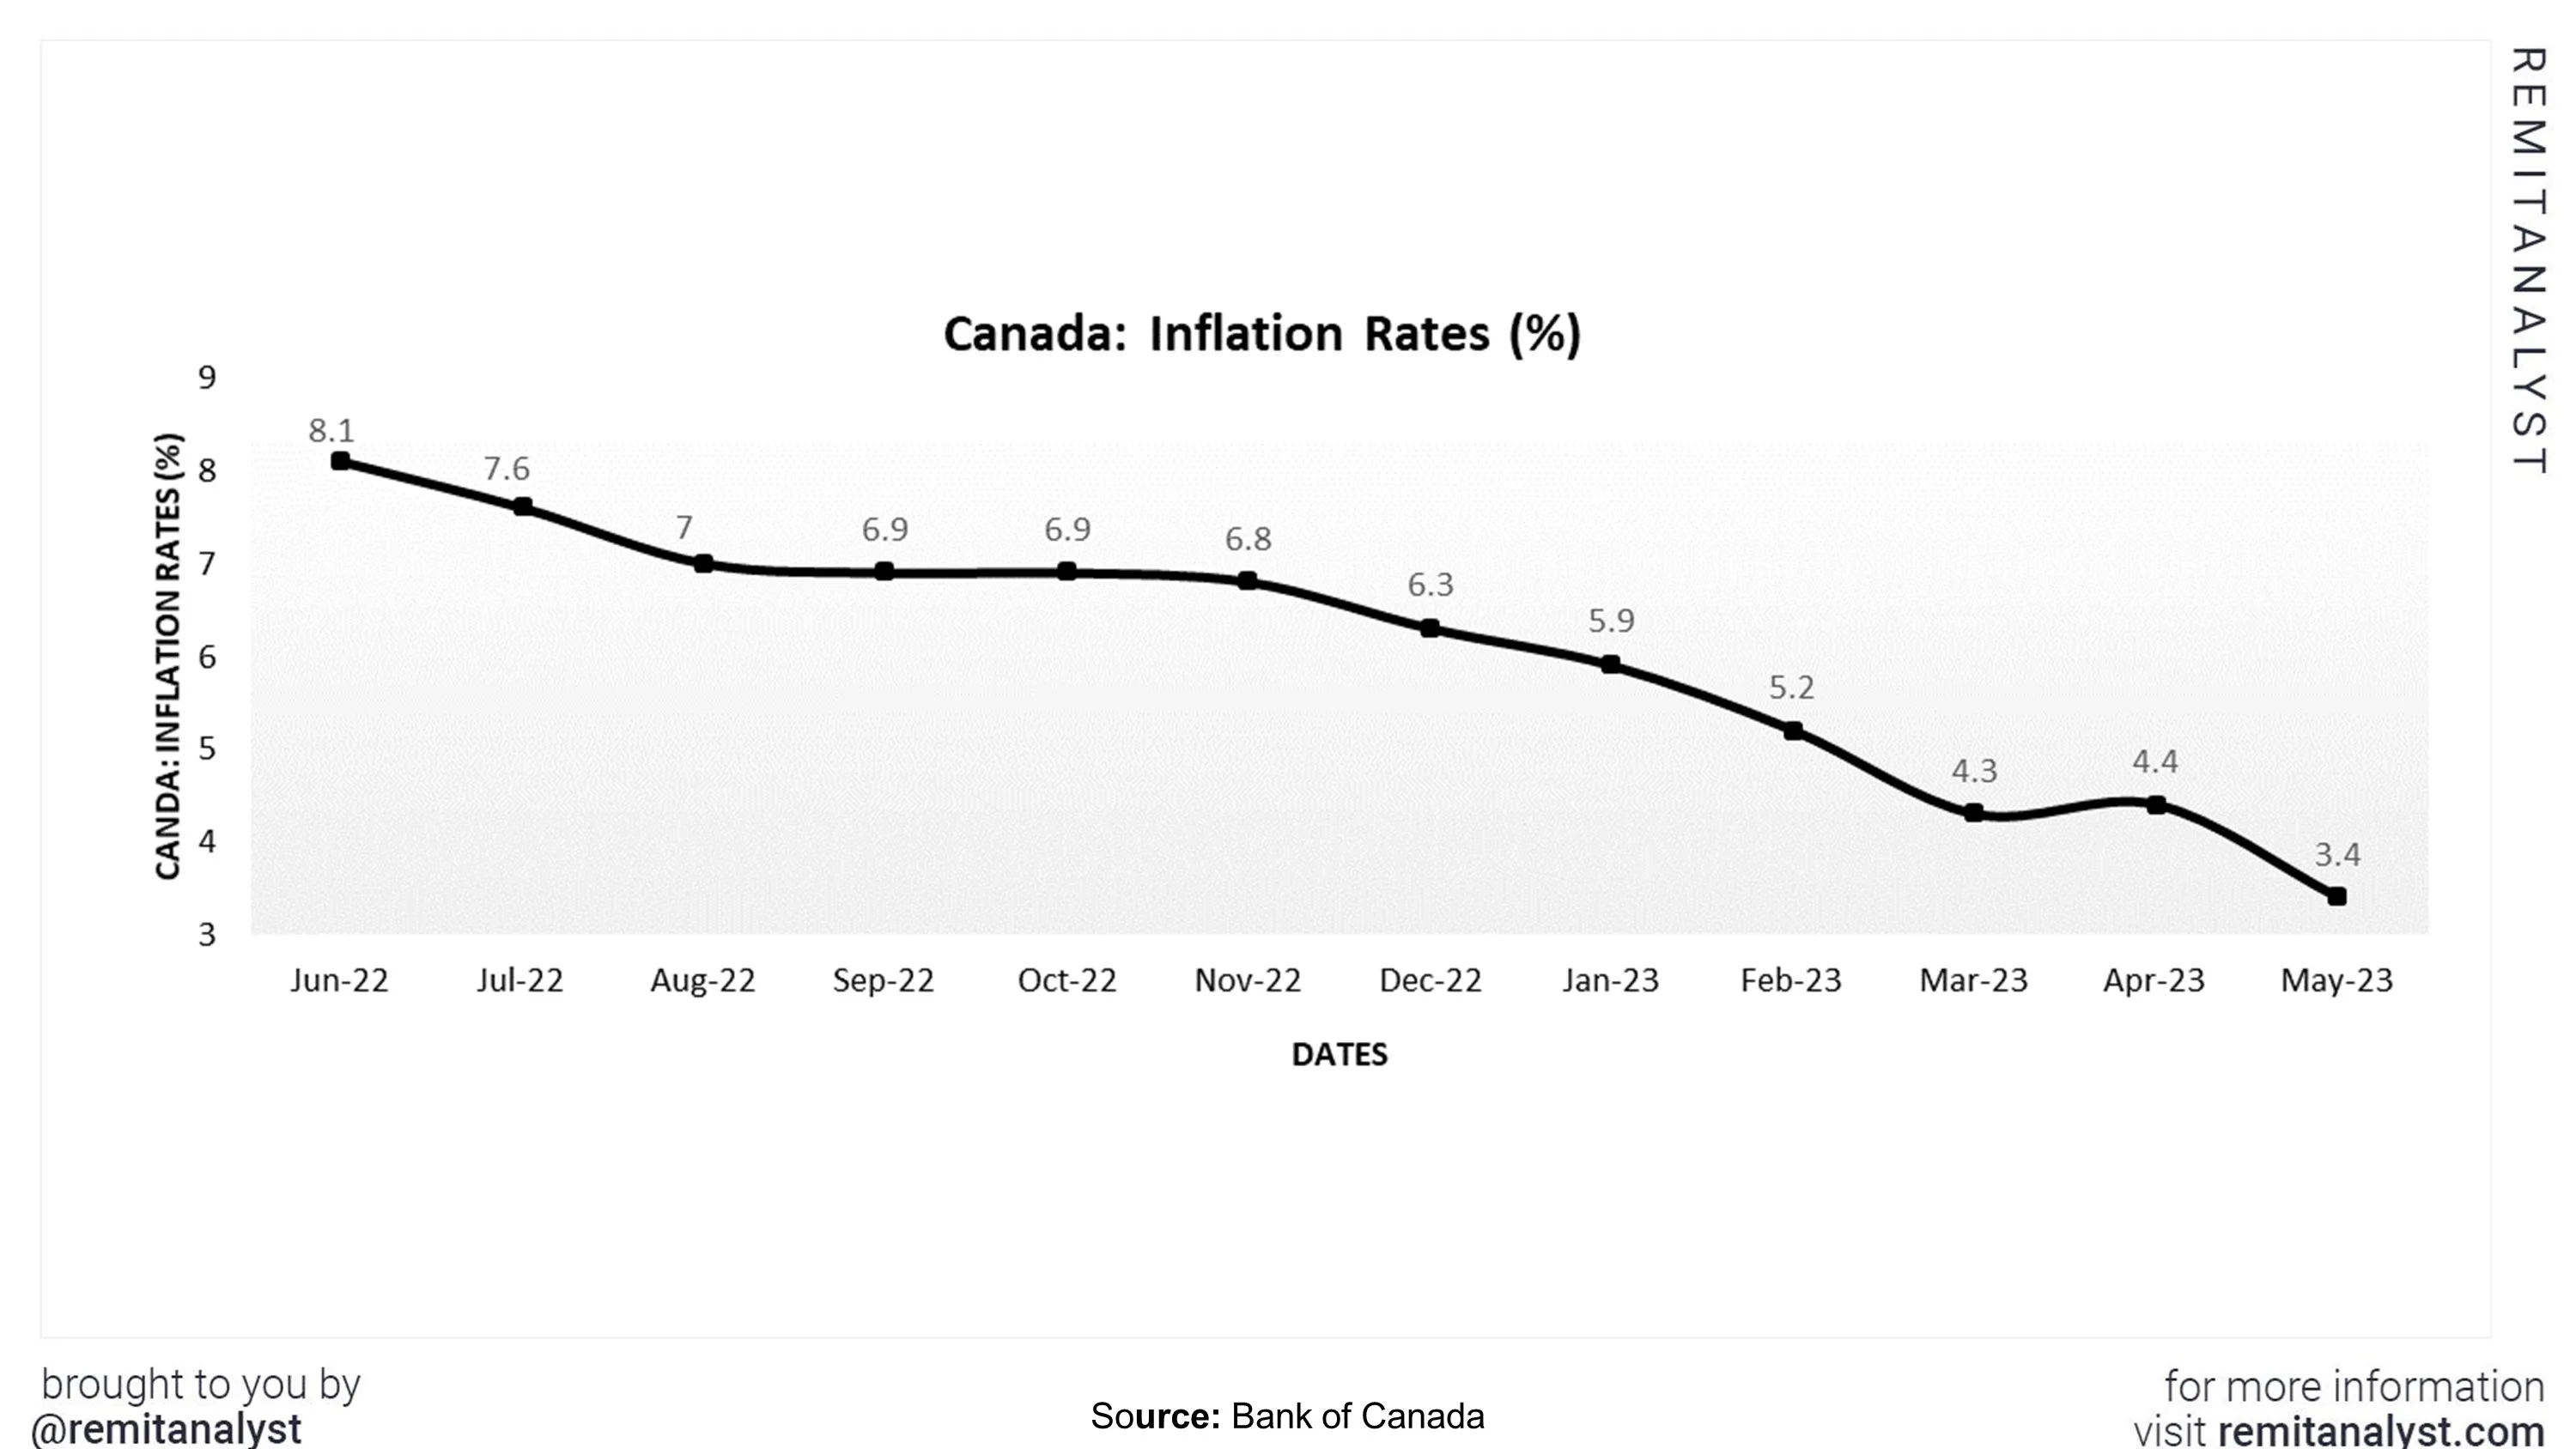 inflation-rates-canada-from-jun-2022-to-may-2023